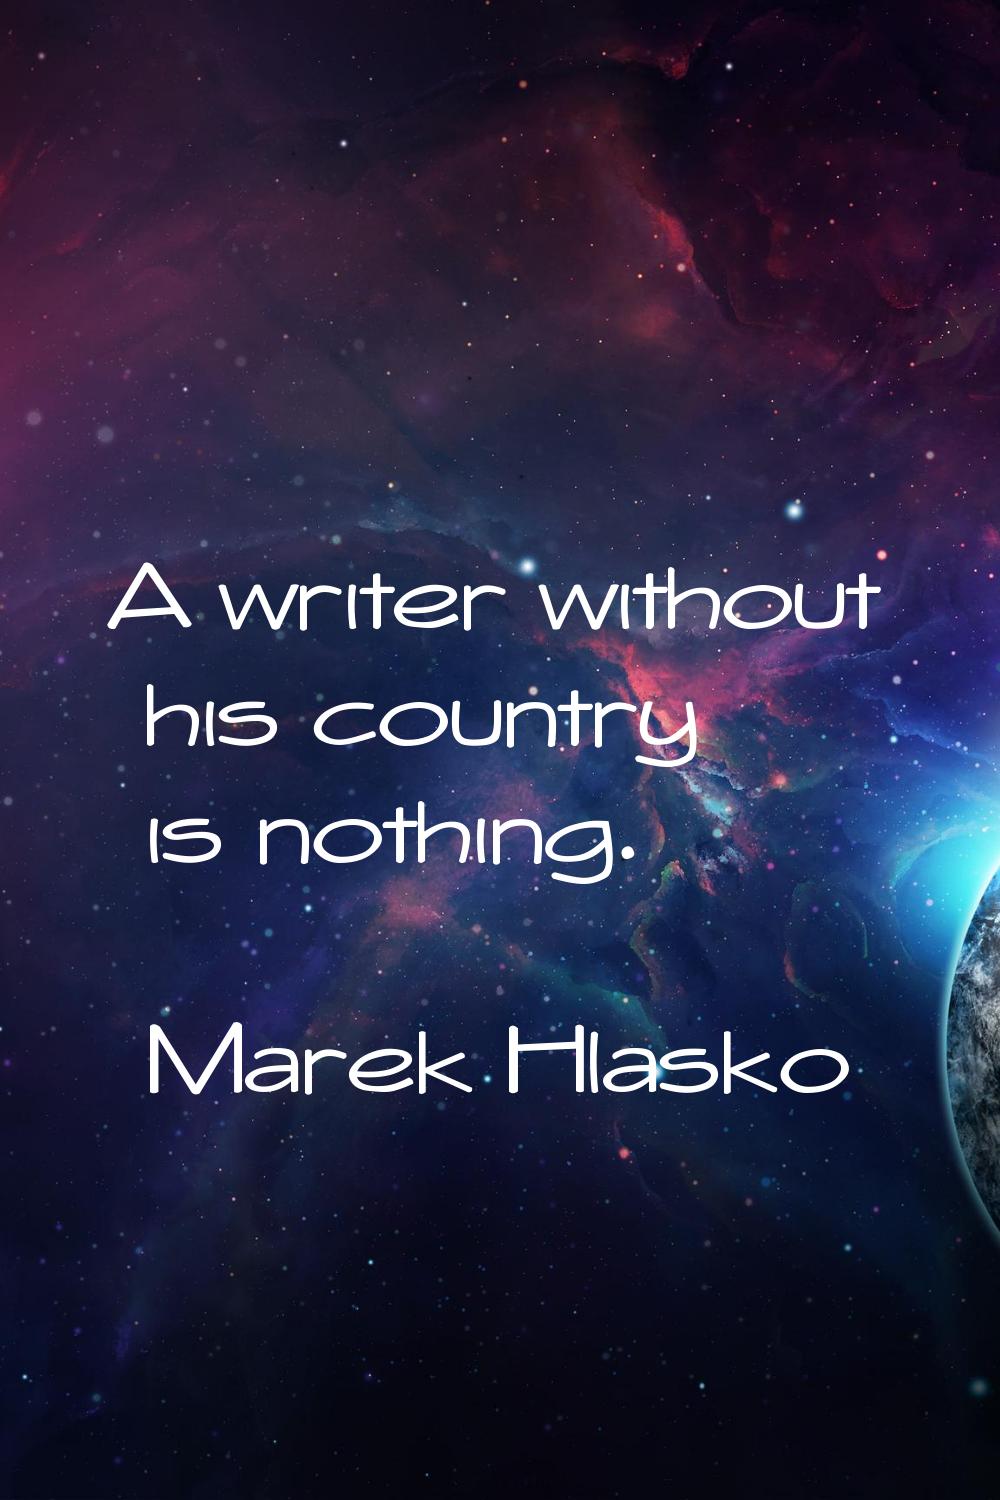 A writer without his country is nothing.